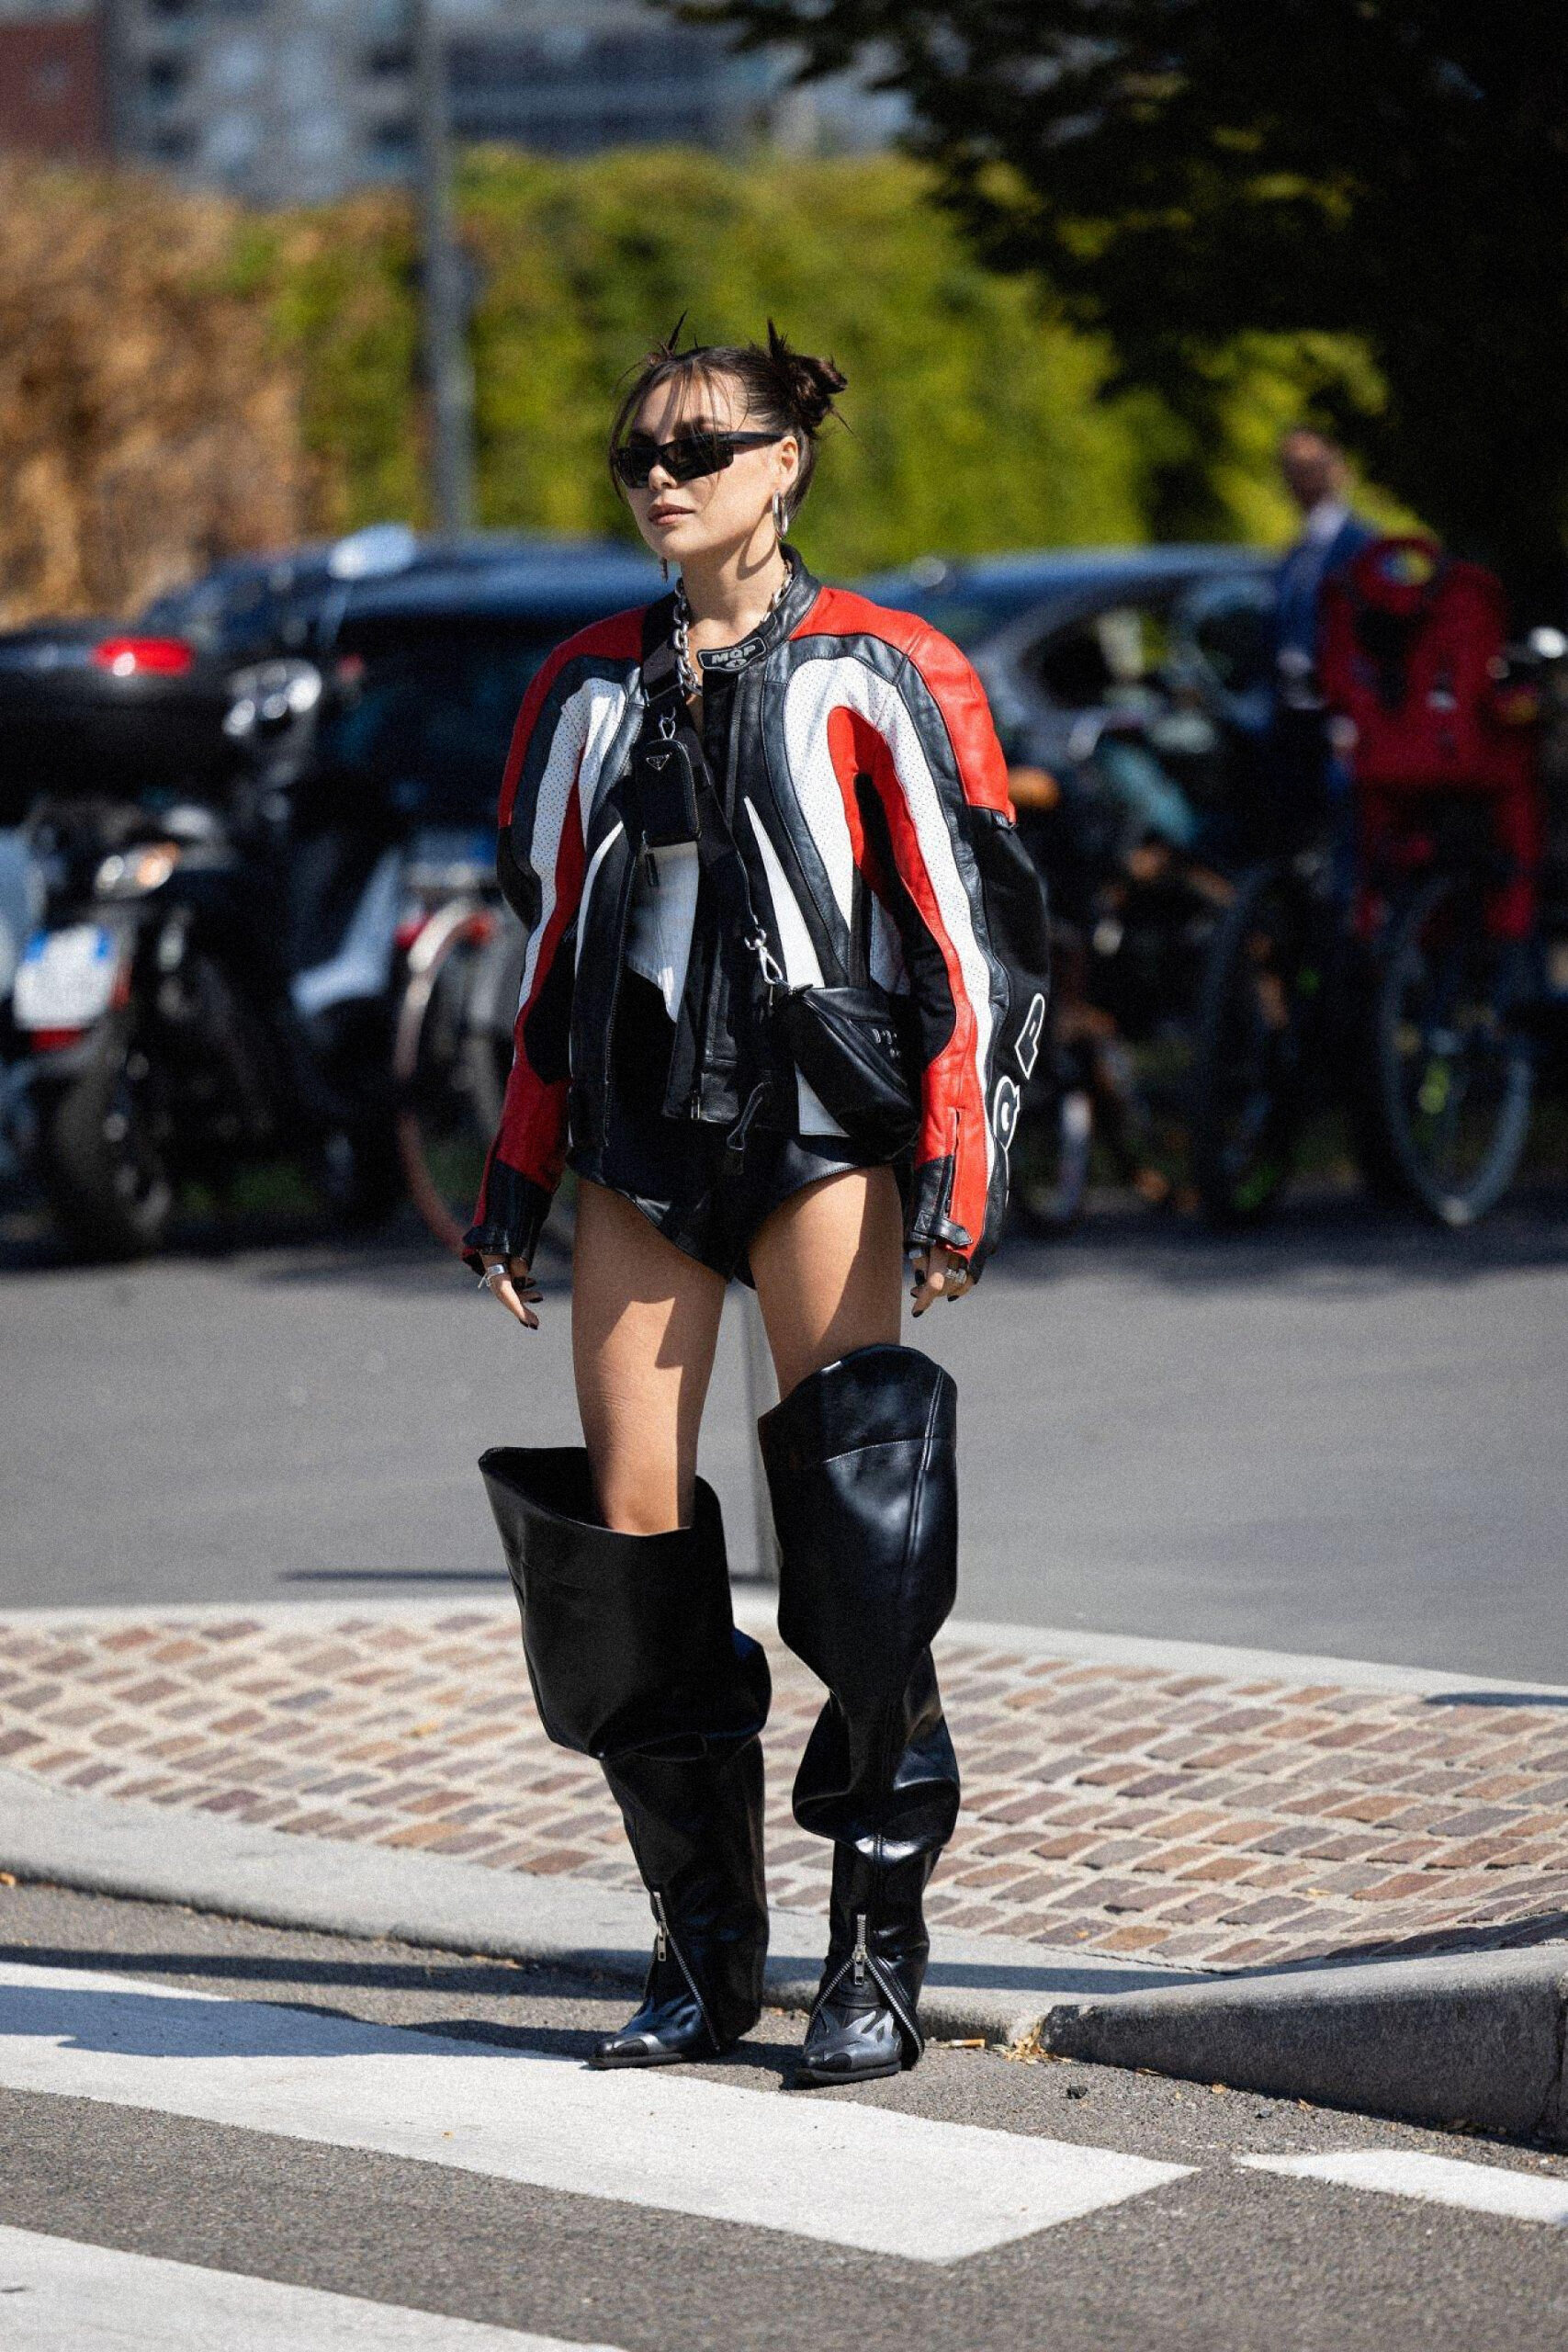 Karina Nigay is seen wearing a biker jacket, sunglasses, soft black boots, black shorts outside Prada show during the Milan Fashion Week - Womenswear Spring/Summer 2023 in 2022 in Milan, Italy. Photo by Valentina Frugiuele/Getty Images